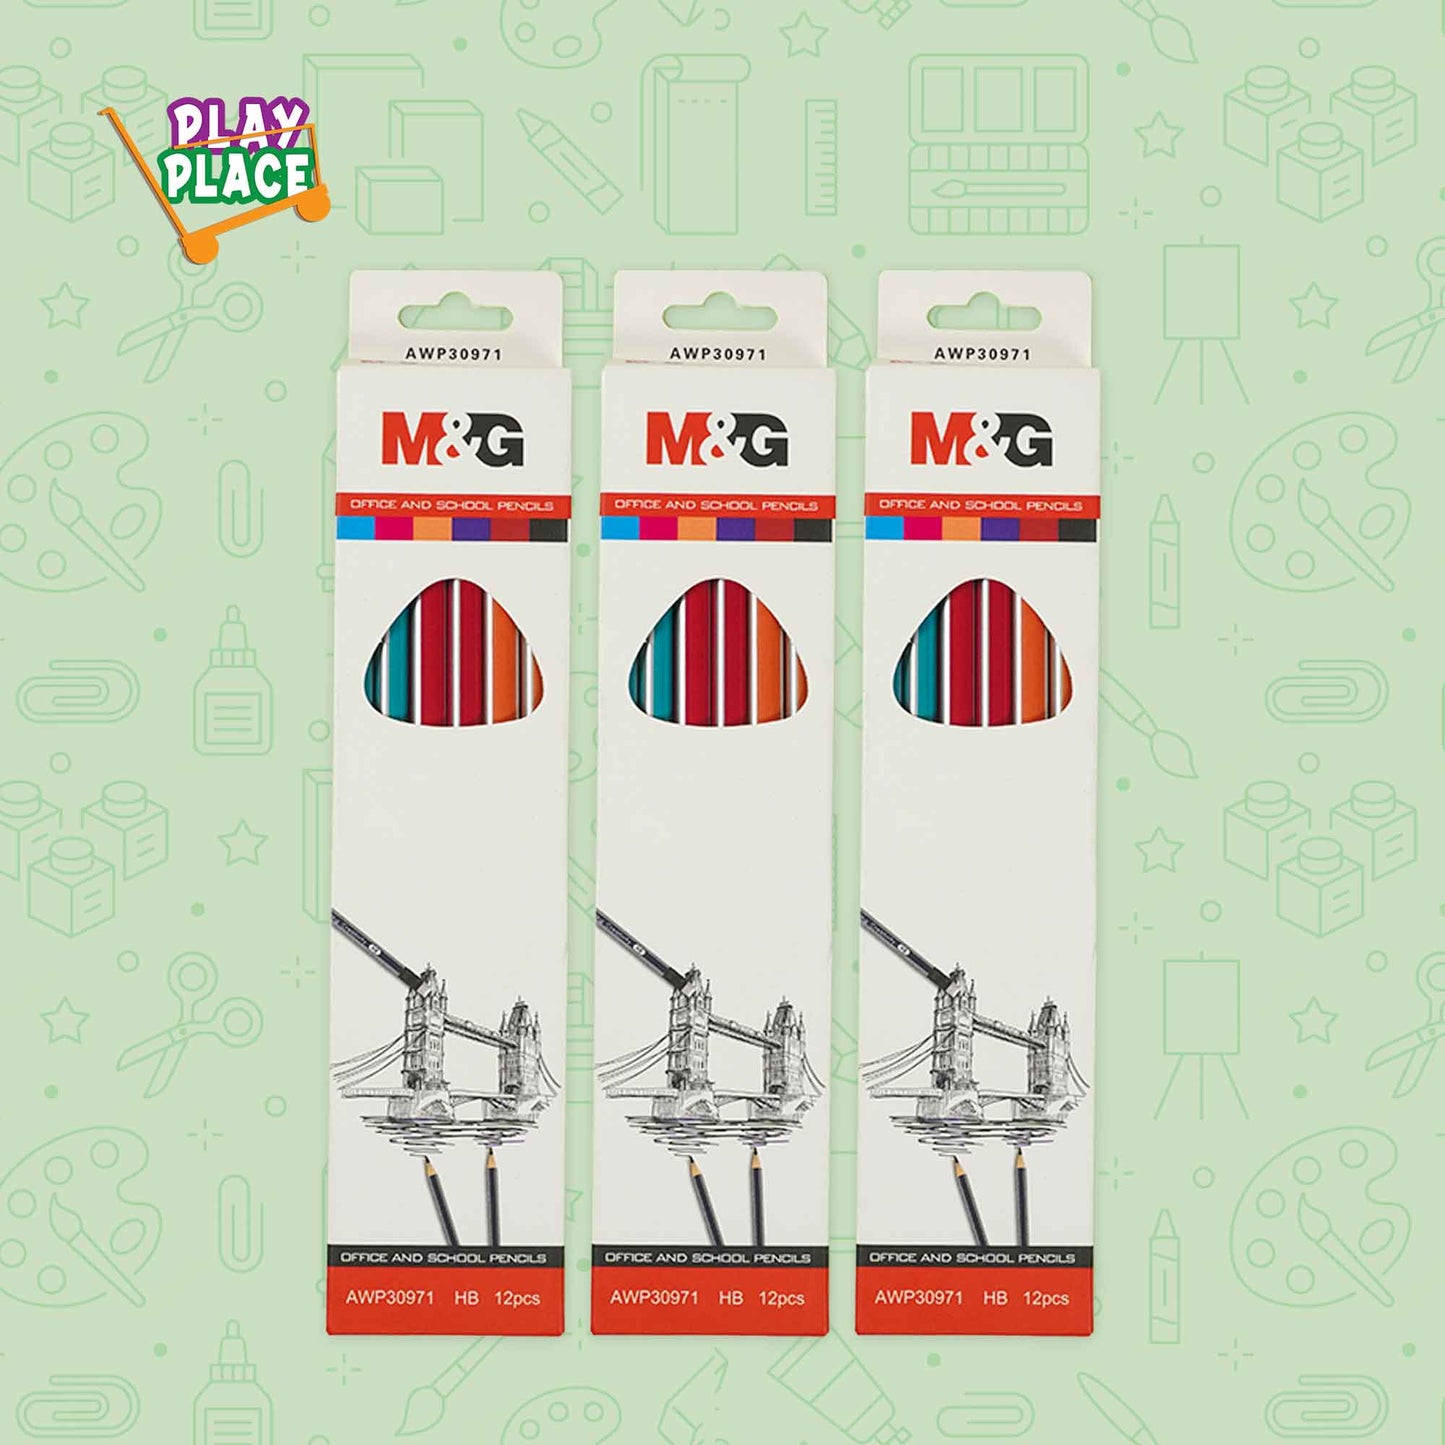 M&G awp30971 Office and School Pencils (Bundle of 3)